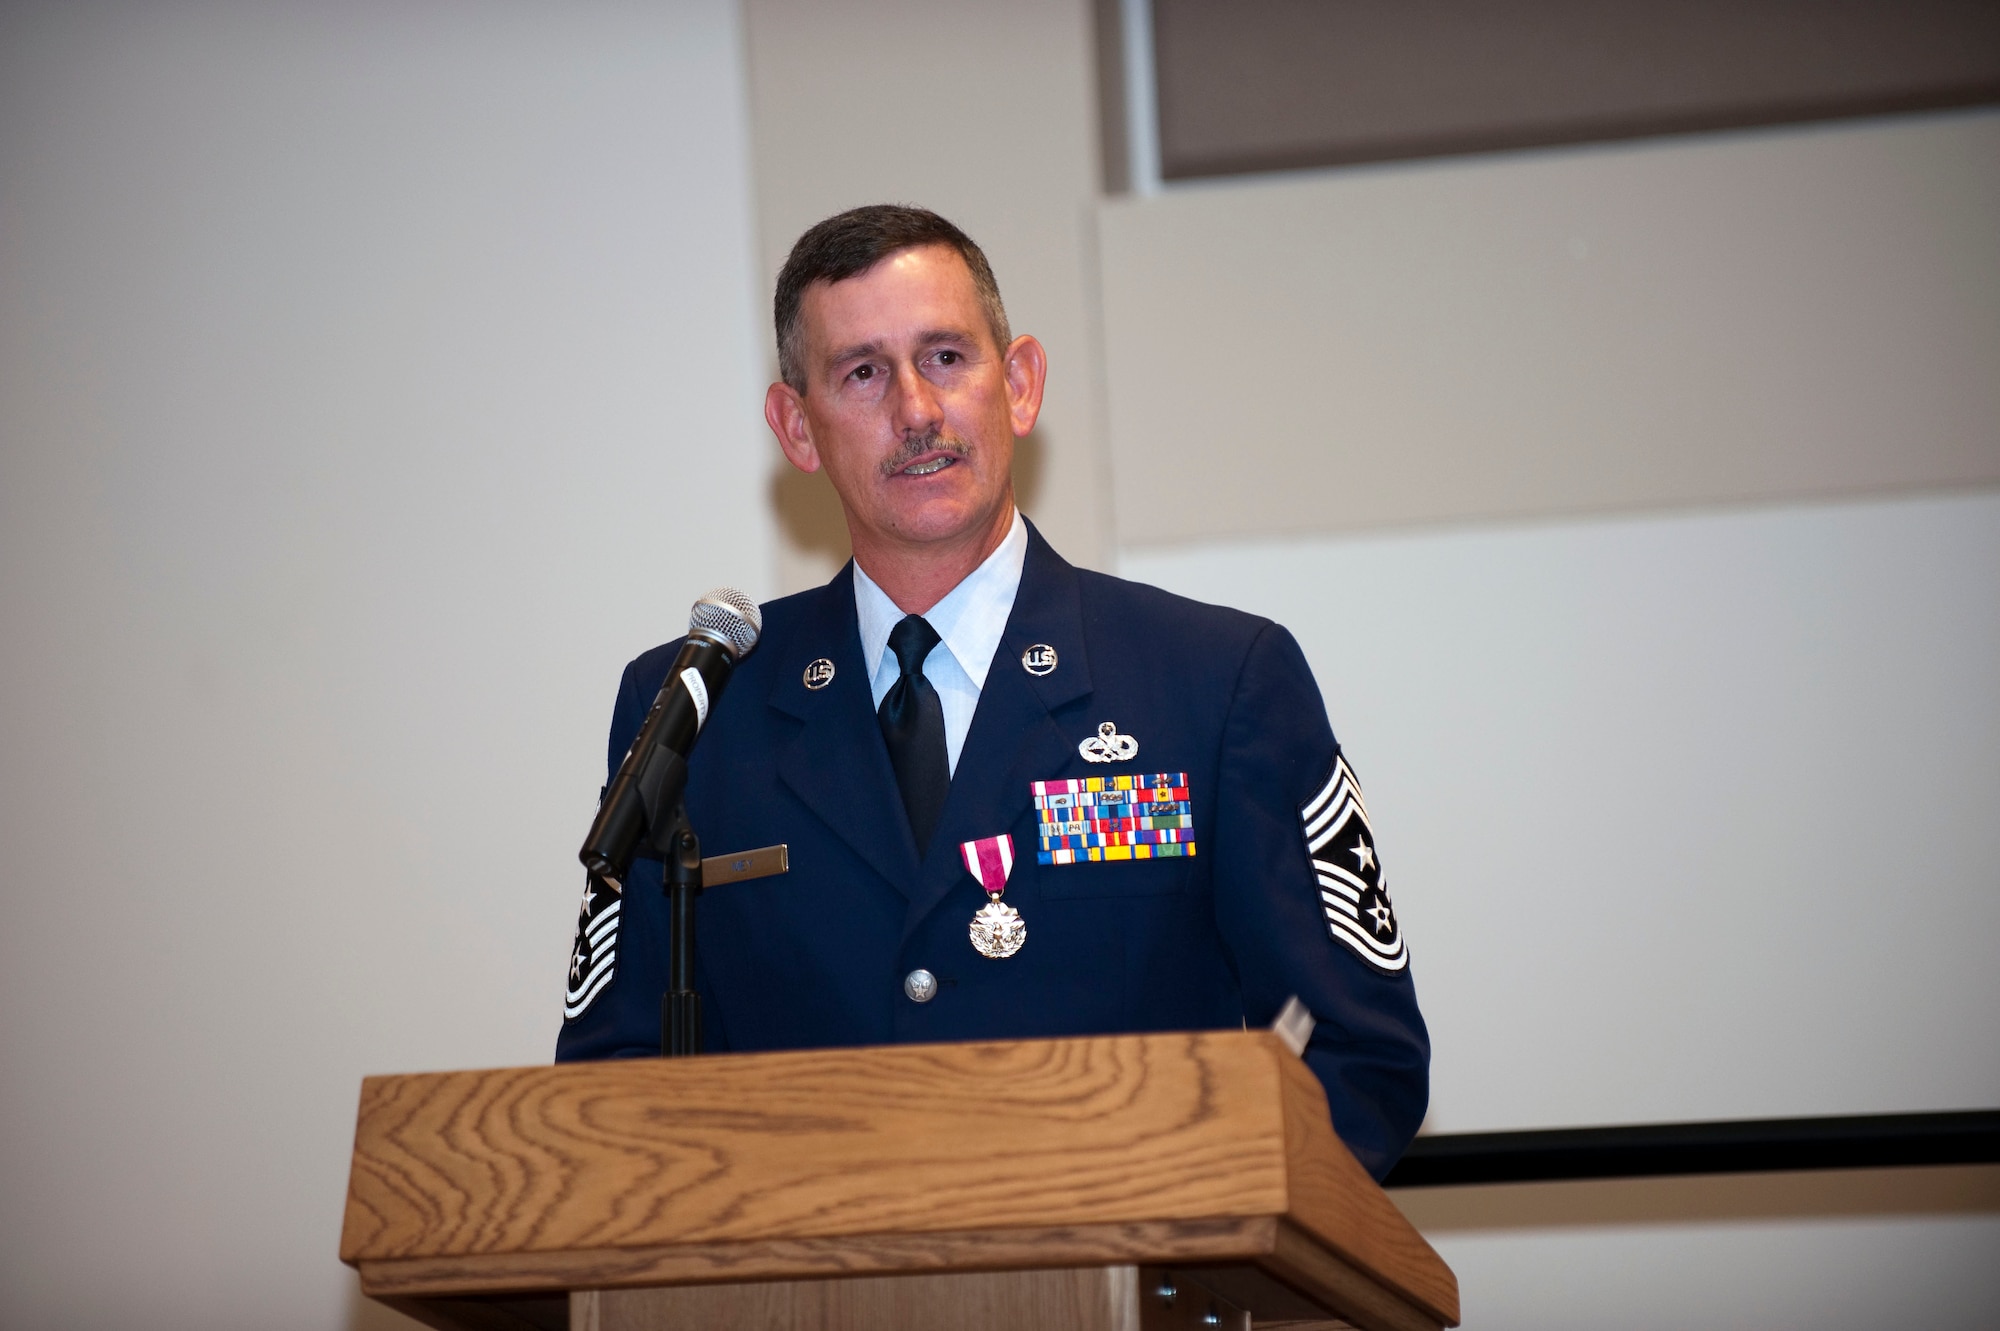 Command Chief Master Sgt. Bruce A. Mey gives his parting words after relinquishing the title of Colorado Air National Guard state command chief master sergeant to Command Chief Master Sgt. Annadele F. Kenderes during a ceremony at Buckley Air Force Base, Colo., Oct 4, 2009. (U.S. Air Force photo by Master Sgt. John Nimmo, Sr.) (Released)